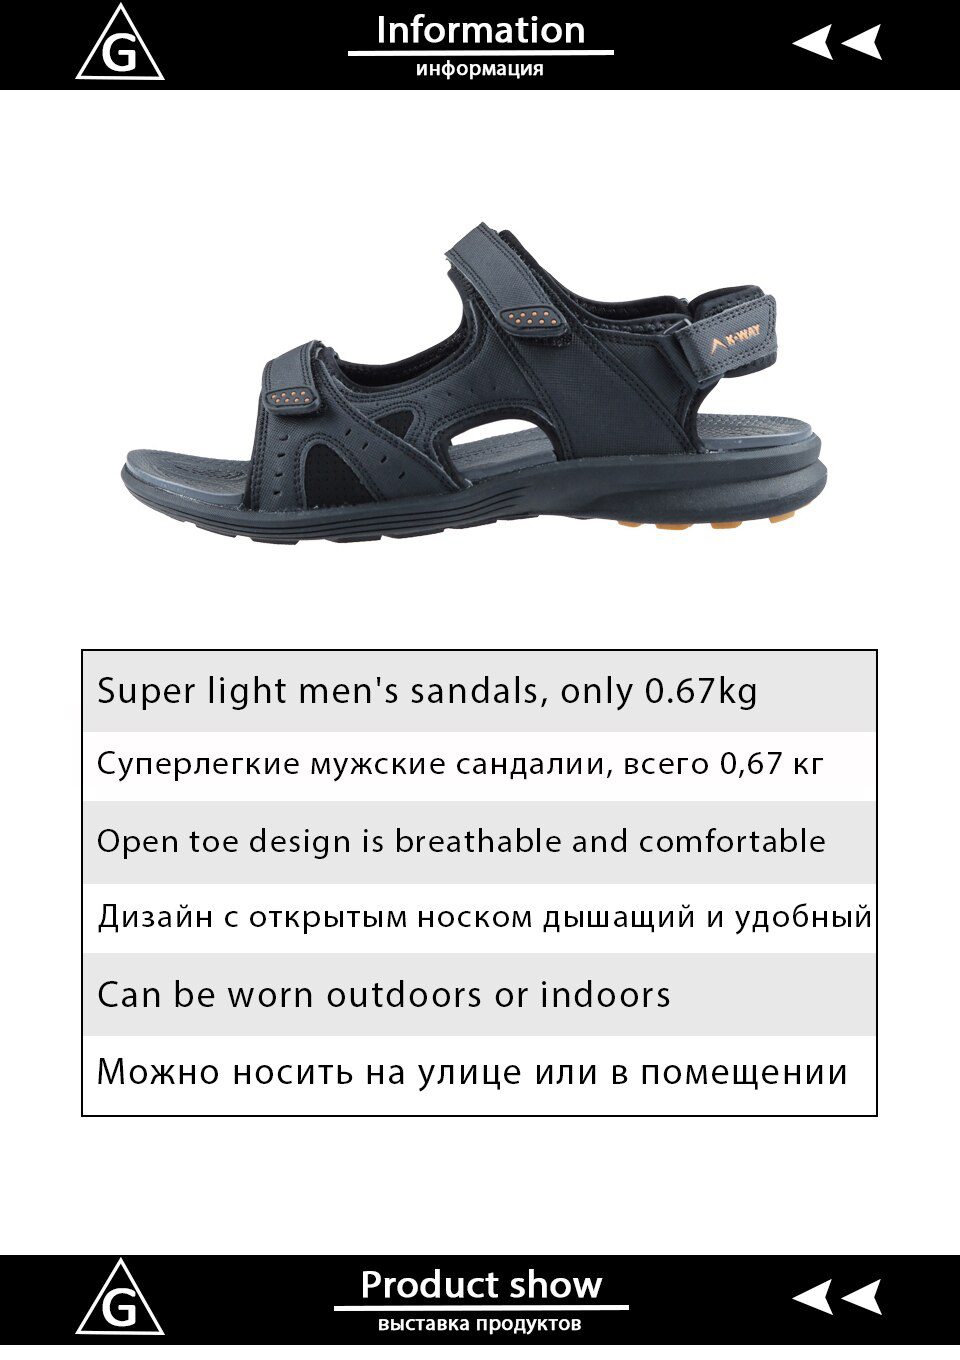 GRITION Men Sandals Outdoor Flat Beach Summer Shoes Clog Male Hospital Hiking Trekking Breathable Big Size 46 Casual Shoes 2020